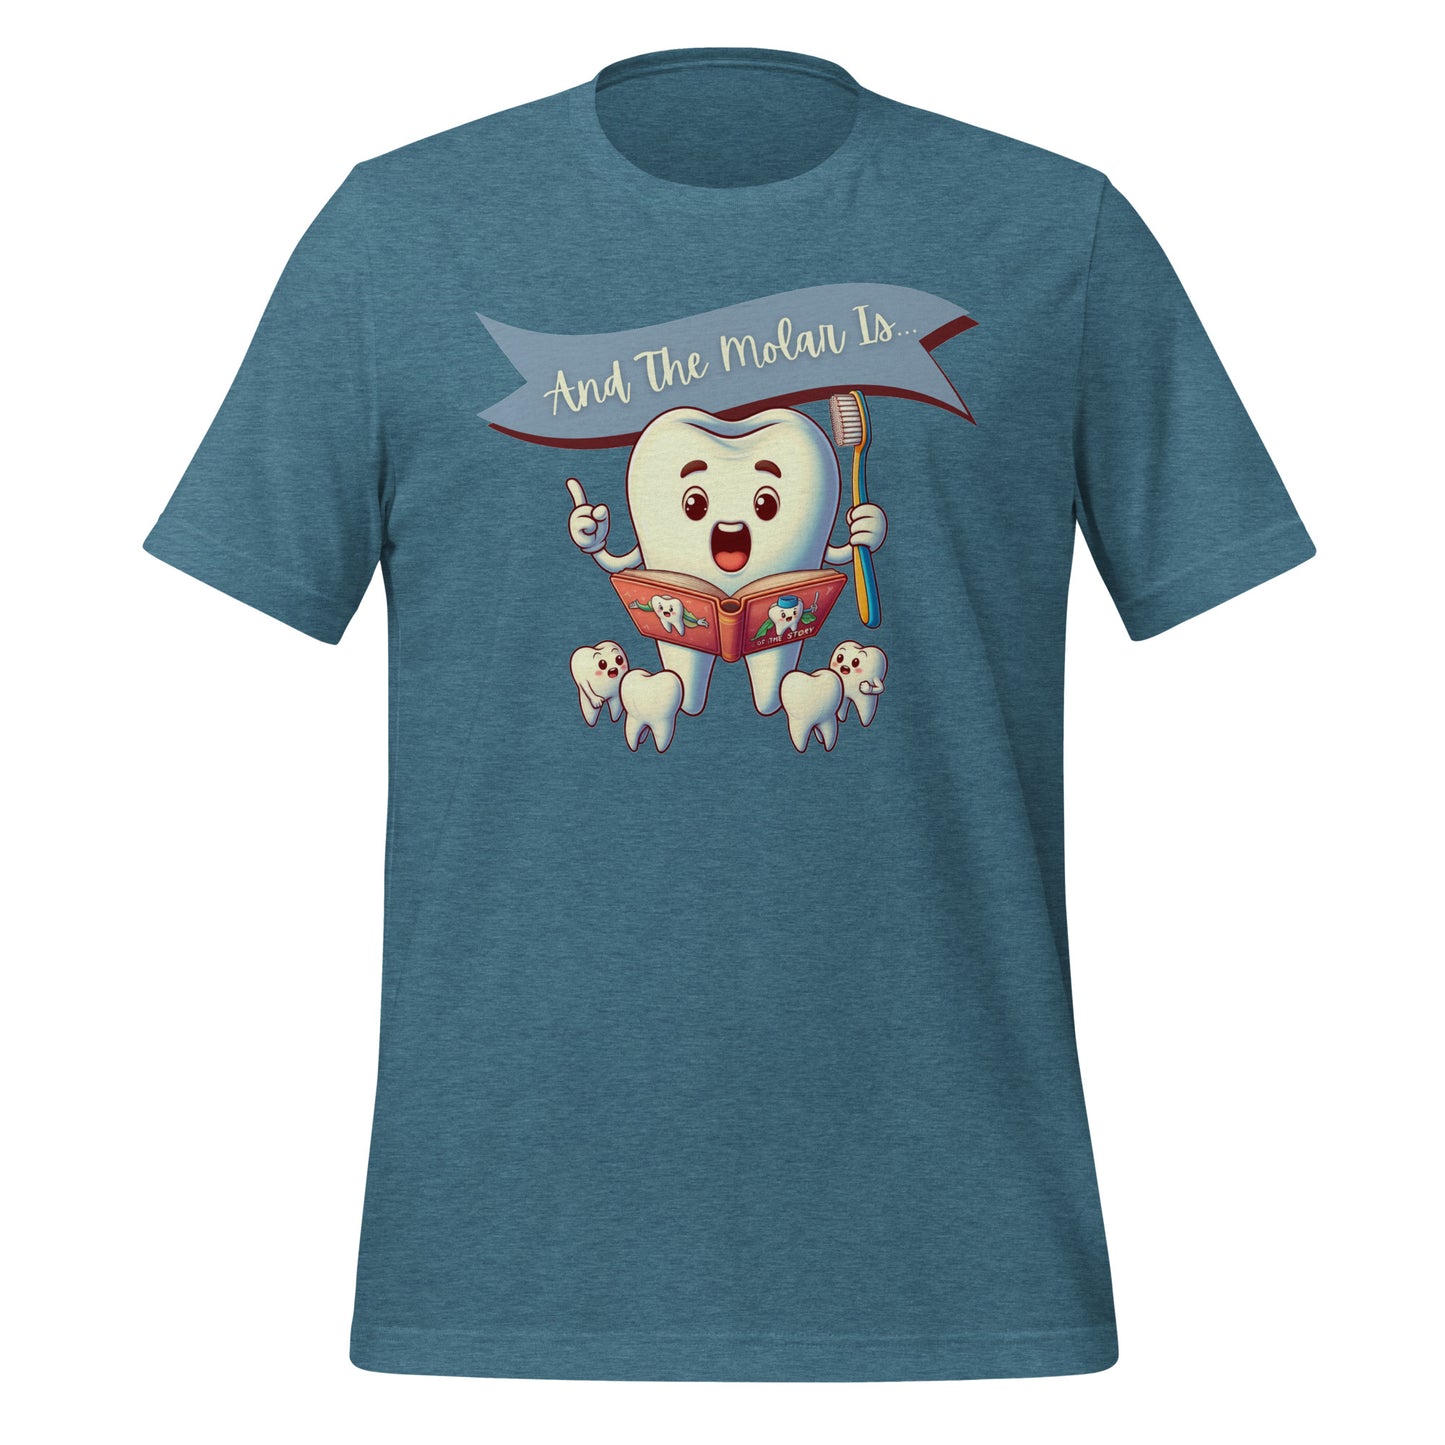 Cute dental shirt featuring a smiling tooth character reading a book with the caption ‘And The Molar Is,’ surrounded by smaller tooth characters. Heather deep teal color.